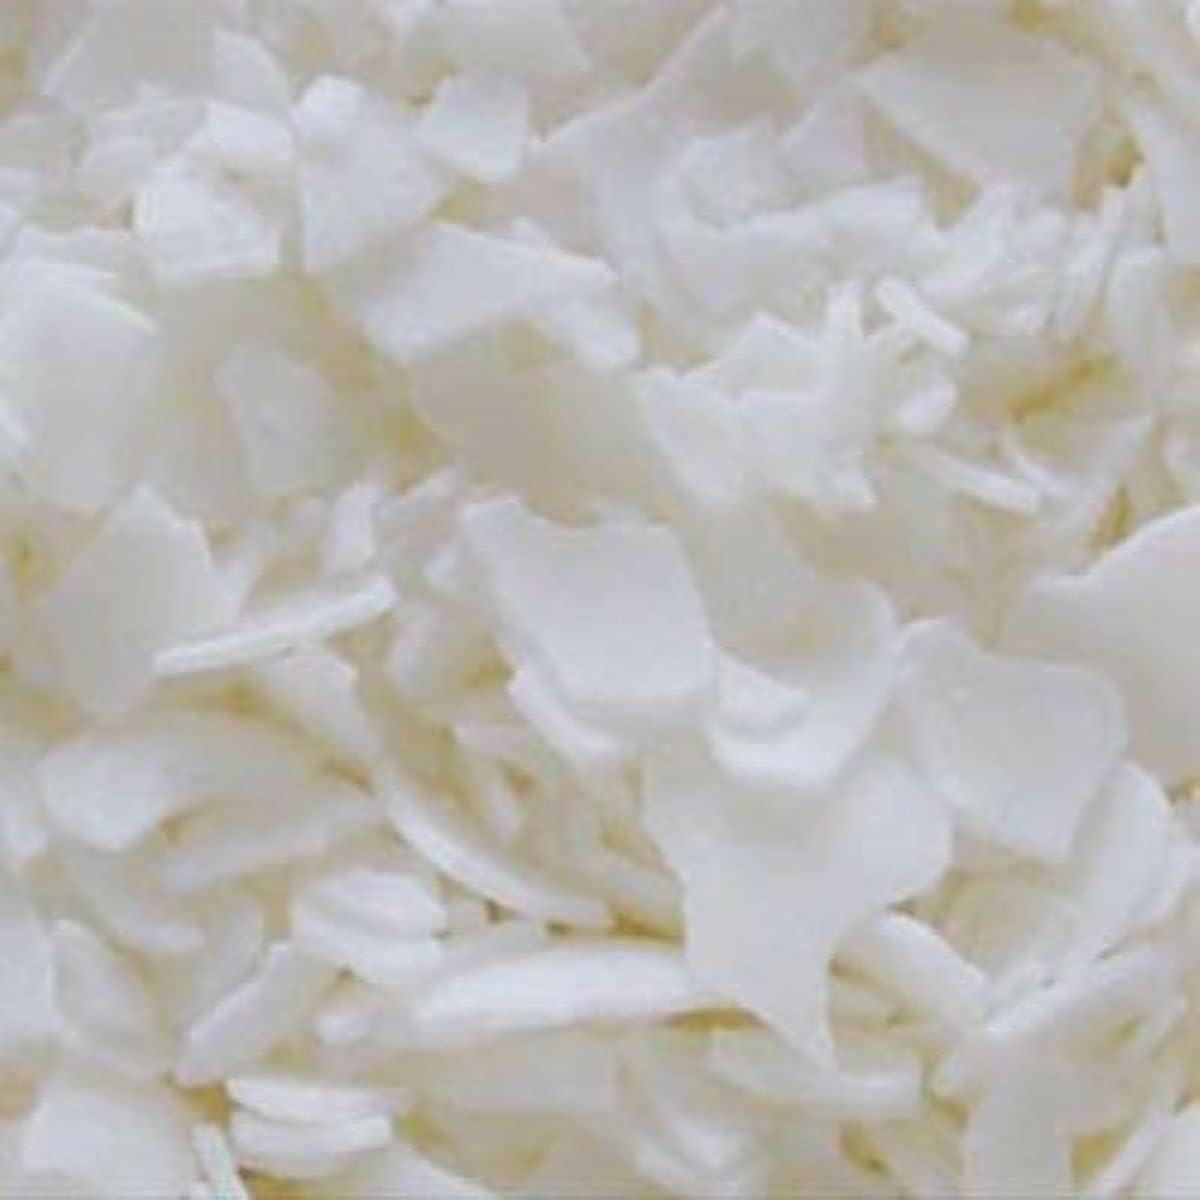 Pure Soy Wax 416 for Candle and Tart Making - 20 LB